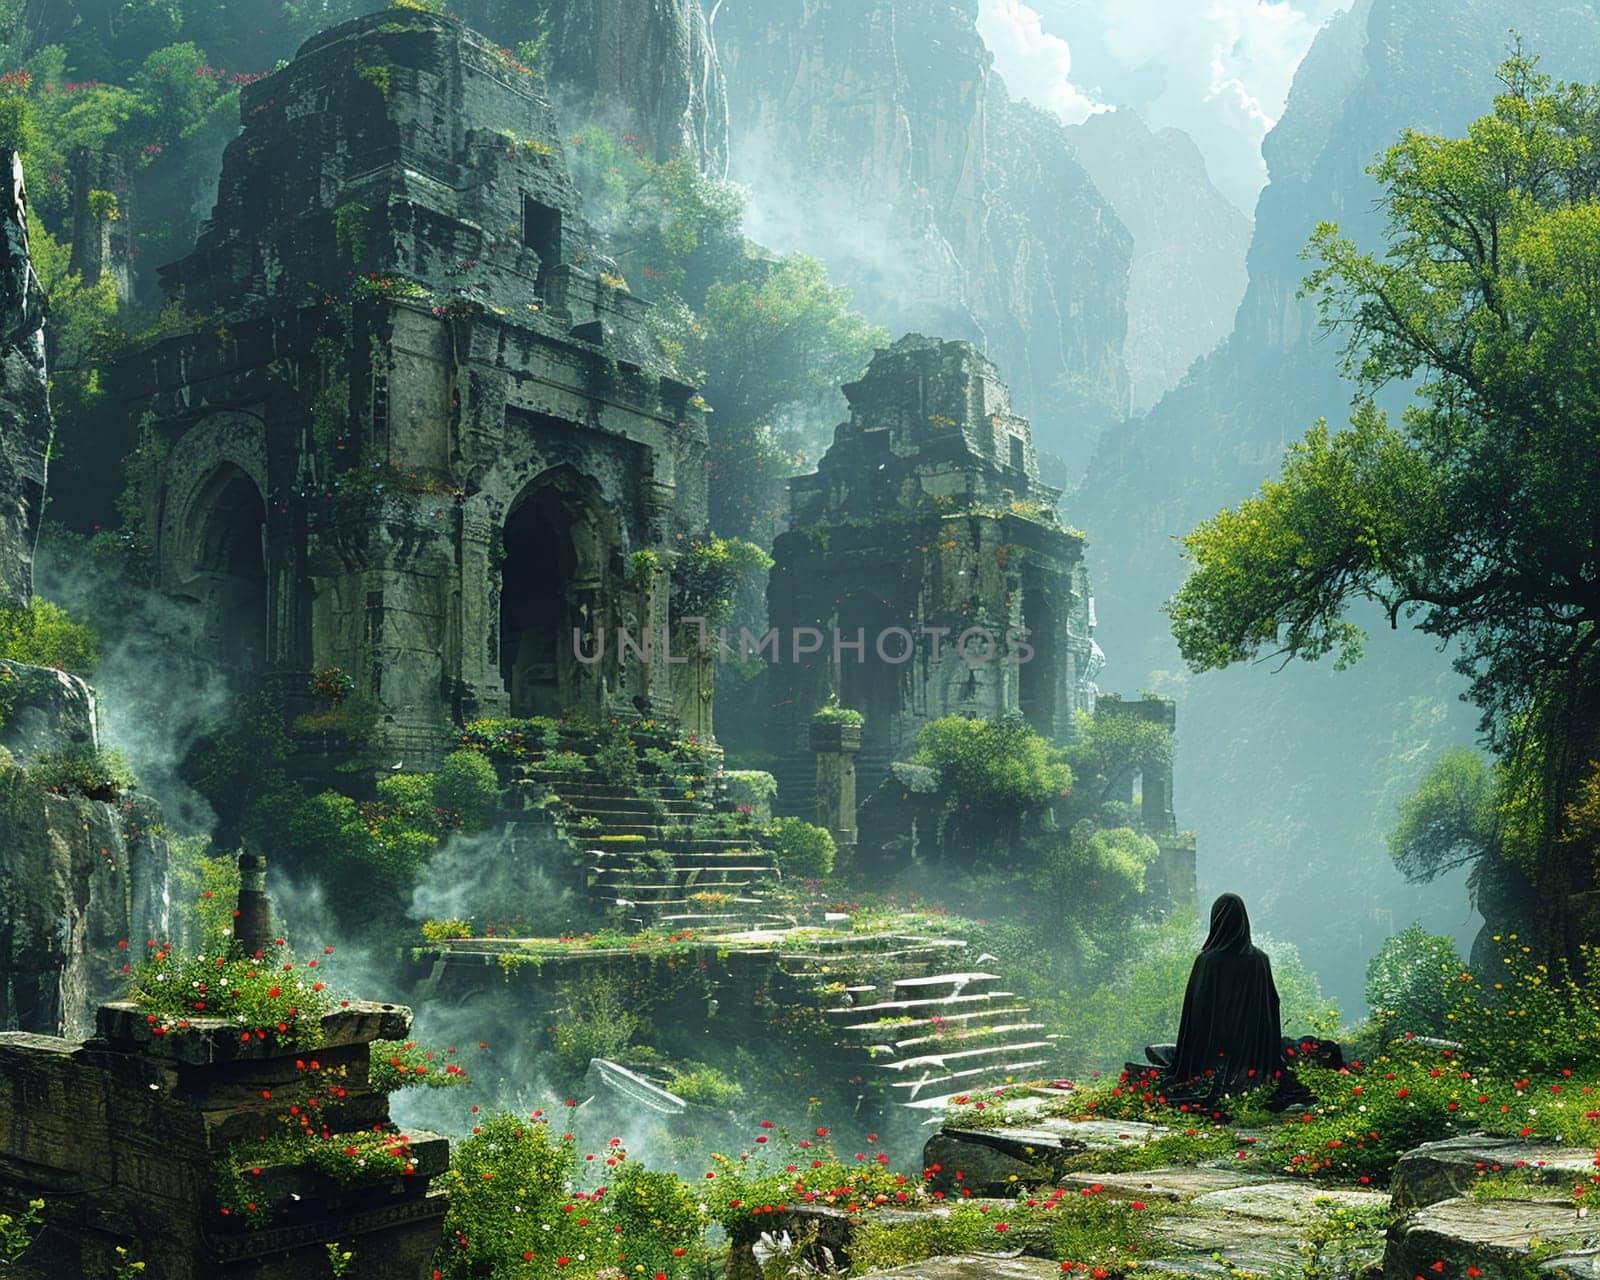 Character lounging amidst ancient ruins, enveloped by the whisper of bygone eras.